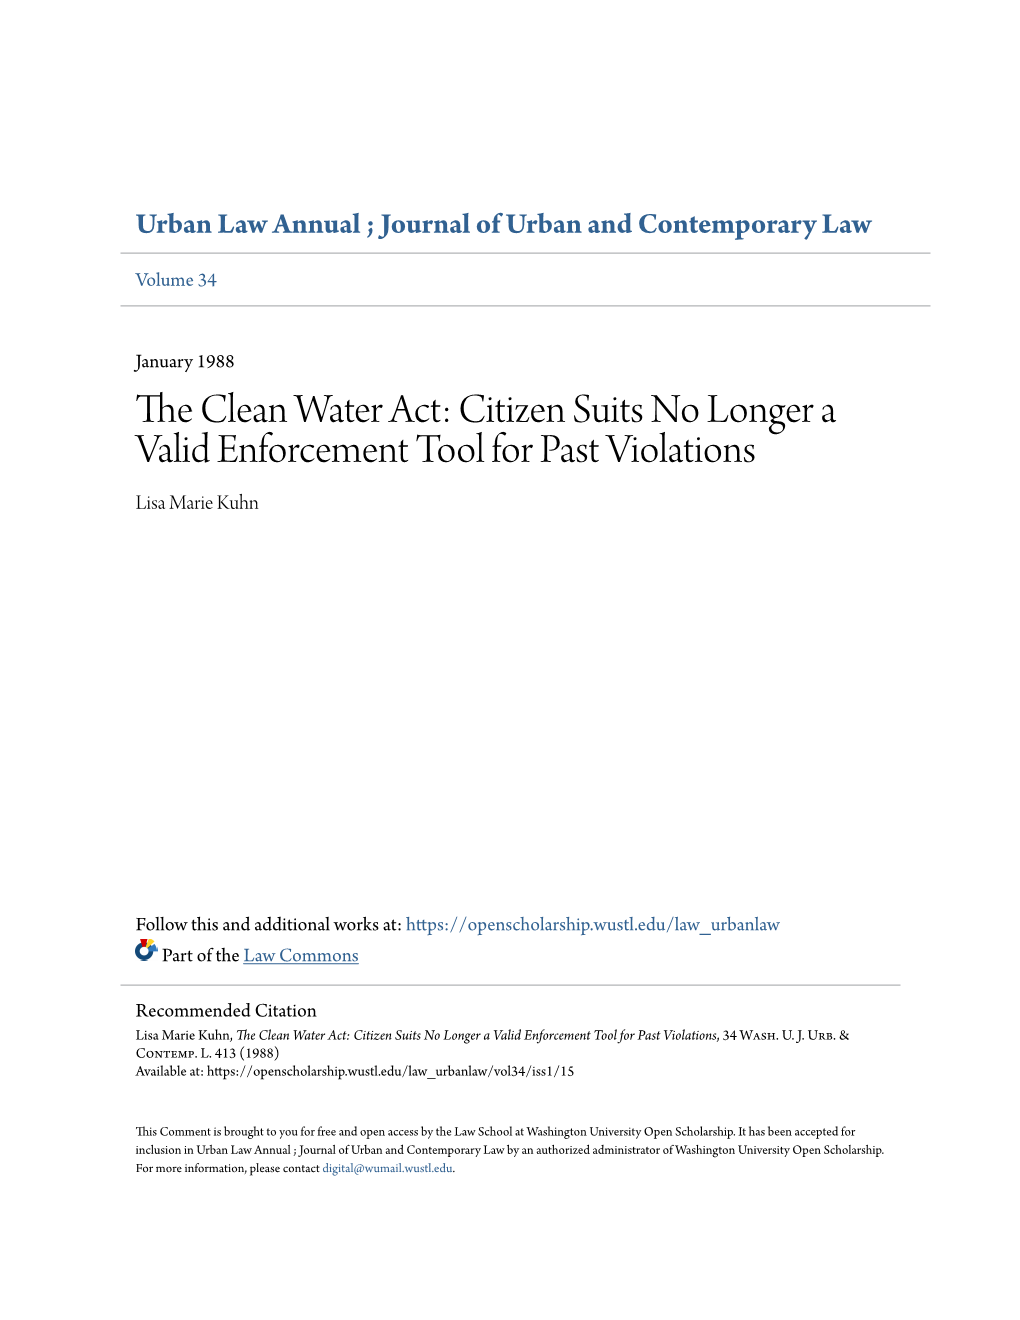 The Clean Water Act: Citizen Suits No Longer a Valid Enforcement Tool for Past Violations, 34 Wash